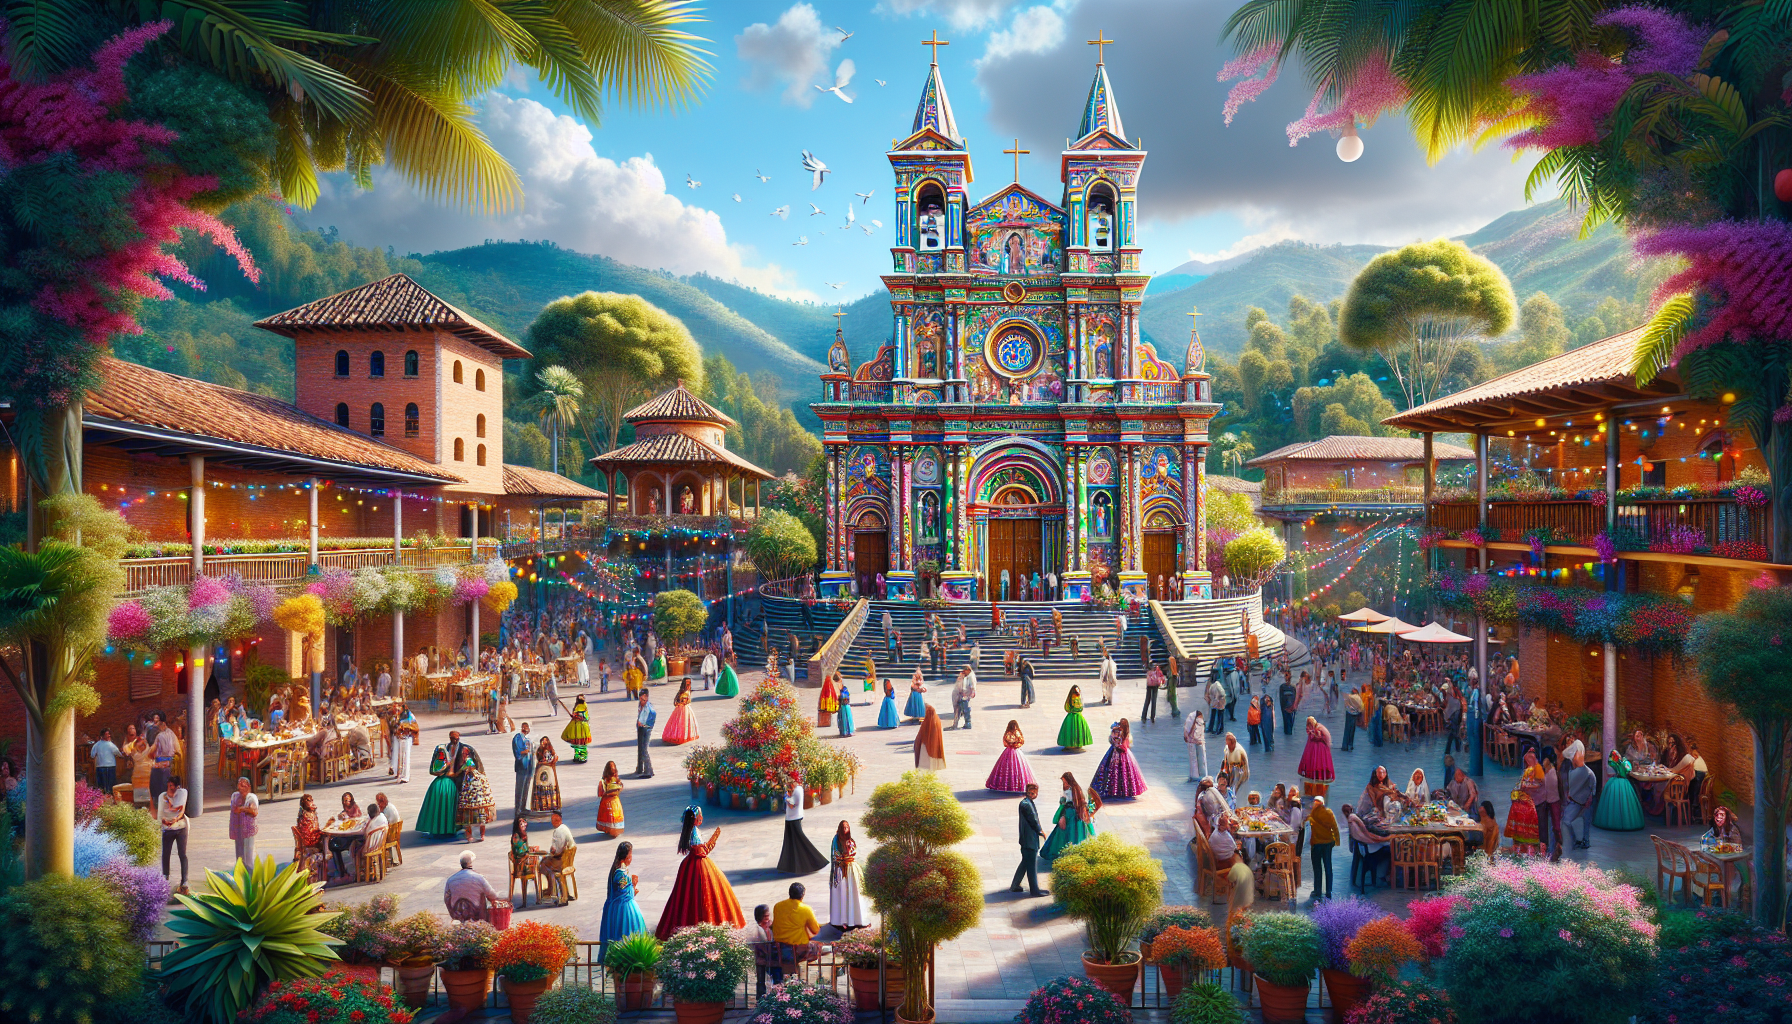 Create an image of a vibrant Christian church community in Medellín, Colombia. The scene should feature a beautifully designed church building with intricate architecture, surrounded by trees and flow